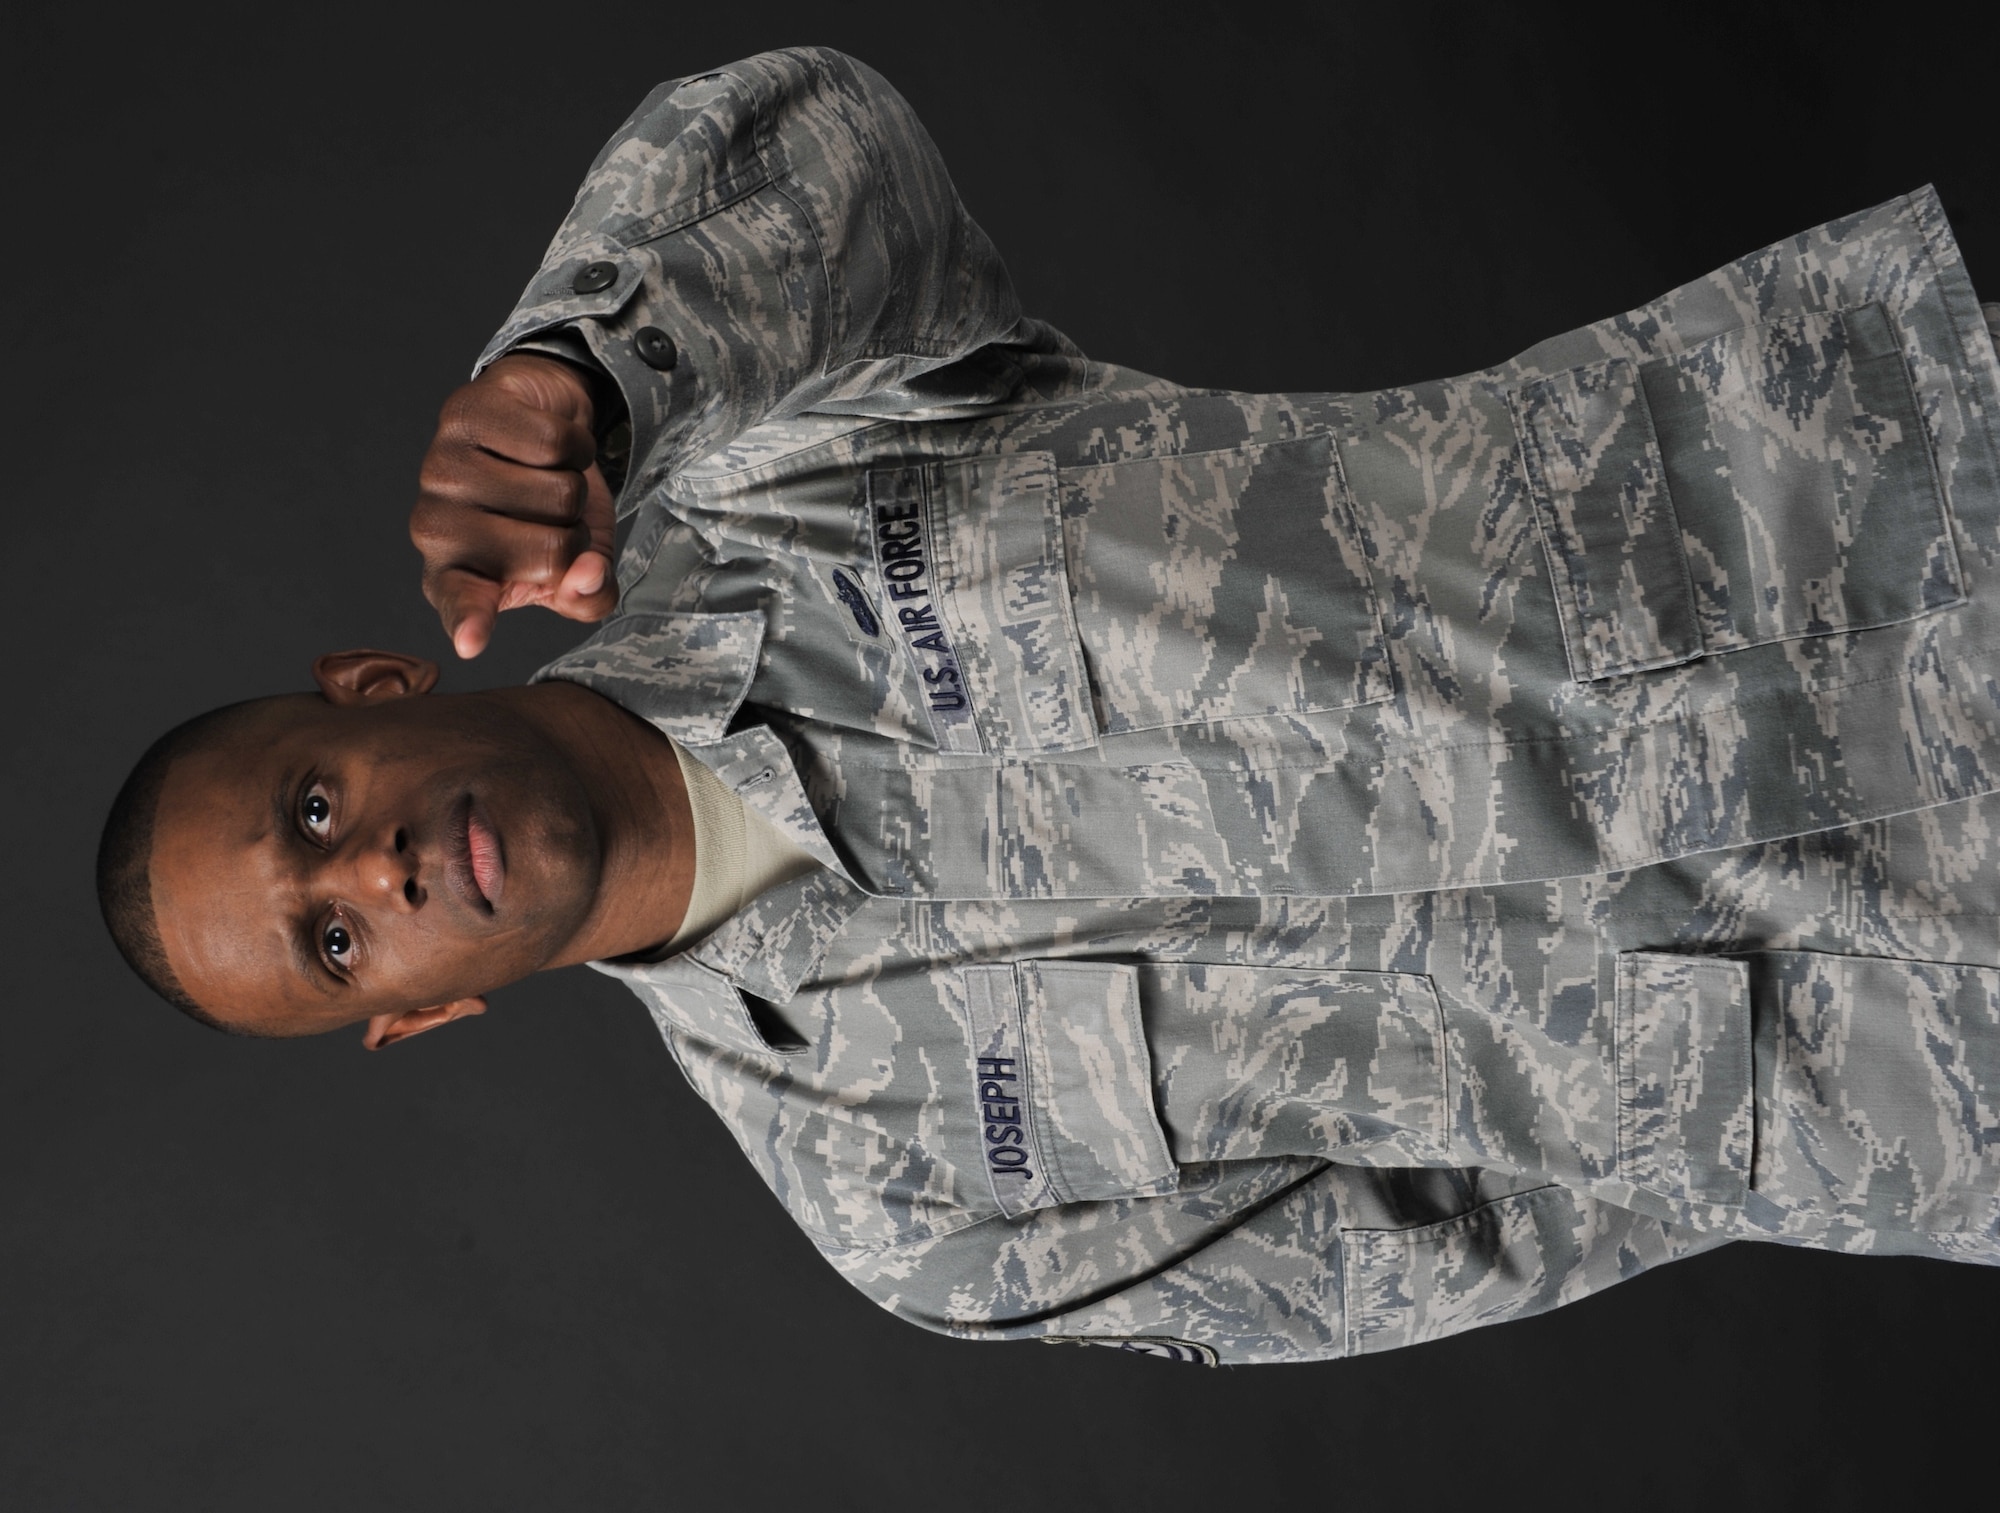 Tech. Sgt. Ednerson Joseph, 1st Special Operations Comptroller Squadron NCO
in charge of commander support staff, poses for a photo at Hurlburt Field, Fla., March 20, 2014. (U.S. Air Force photo/Senior Airman Naomi Griego)